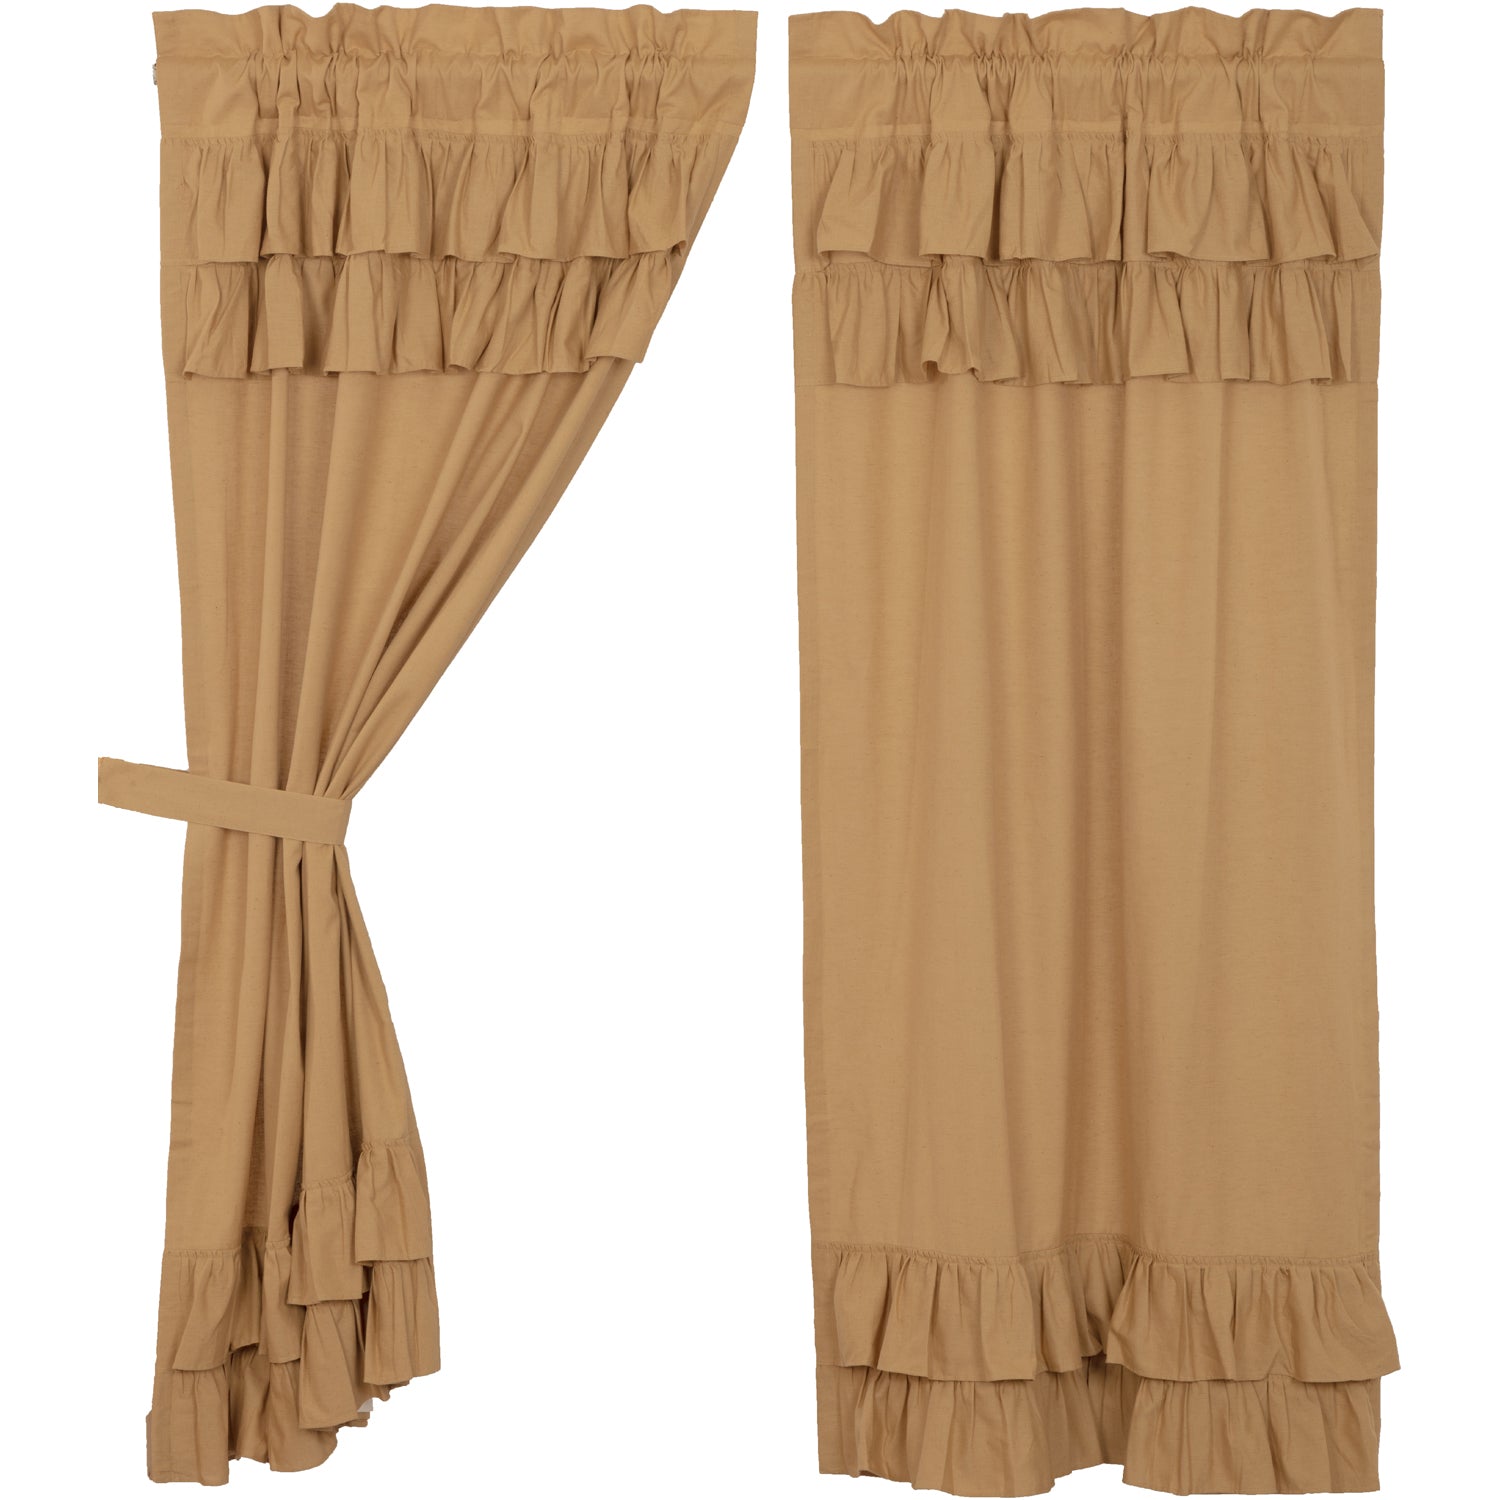 April & Olive Simple Life Flax Khaki Ruffled Short Panel Set of 2 63x36 By VHC Brands